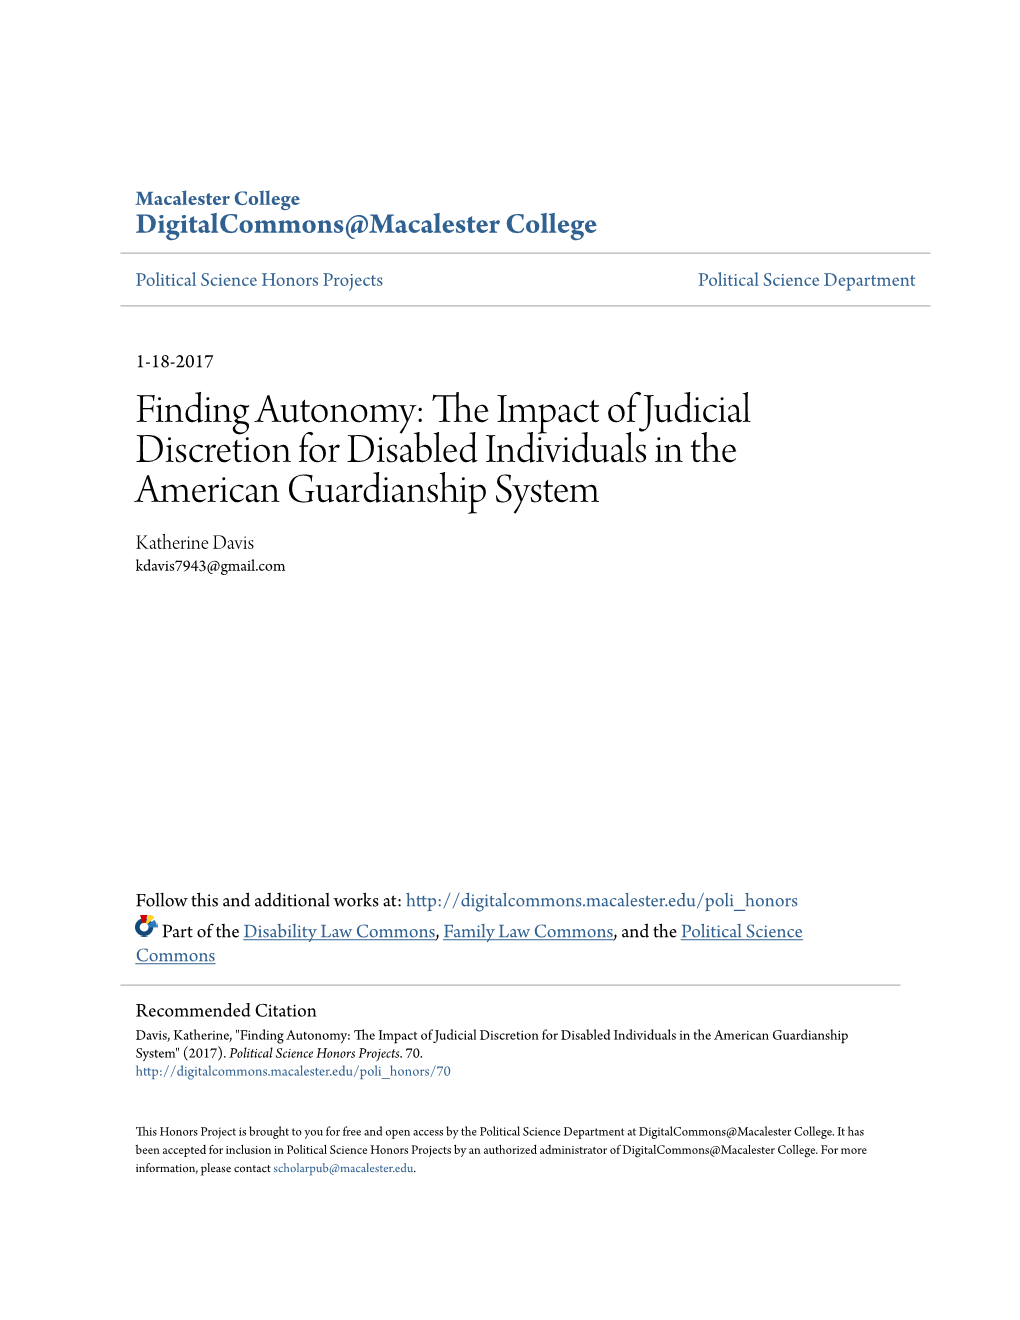 The Impact of Judicial Discretion for Disabled Individuals in the American Guardianship System